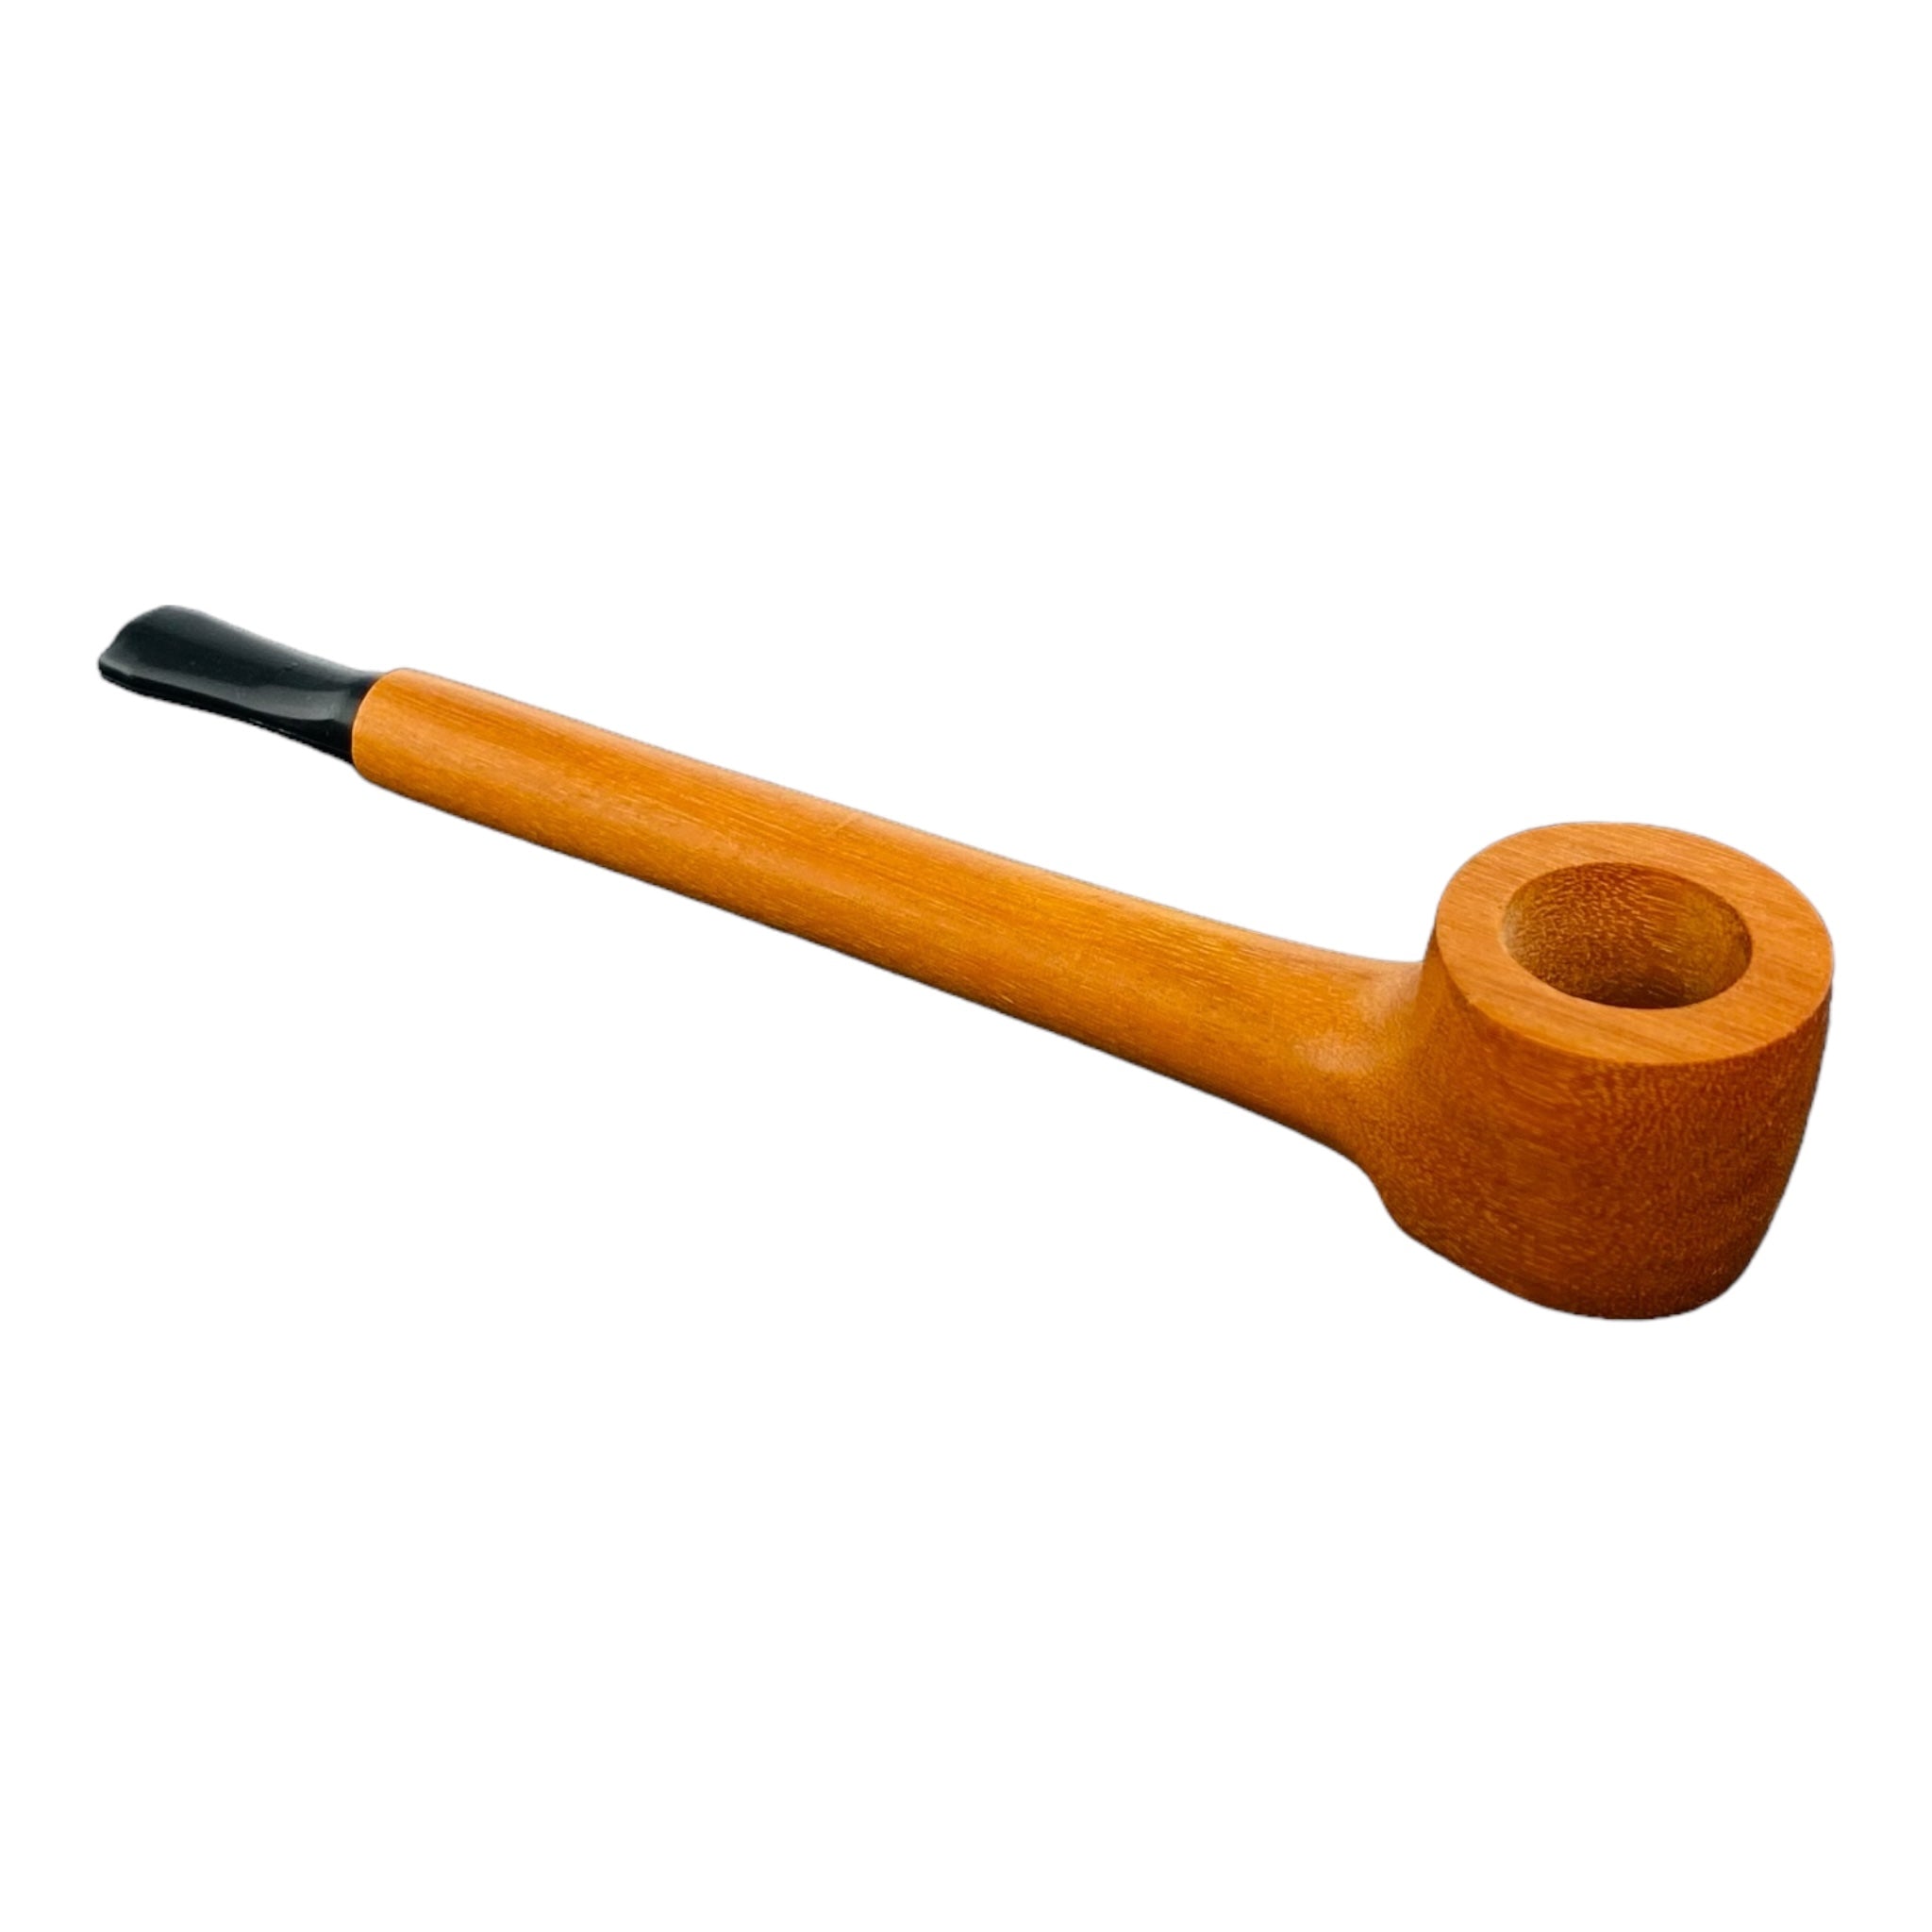 Wood Hand Pipe - Simple Skinny Long Stem Wood Pipe With Plastic Mouthpiece